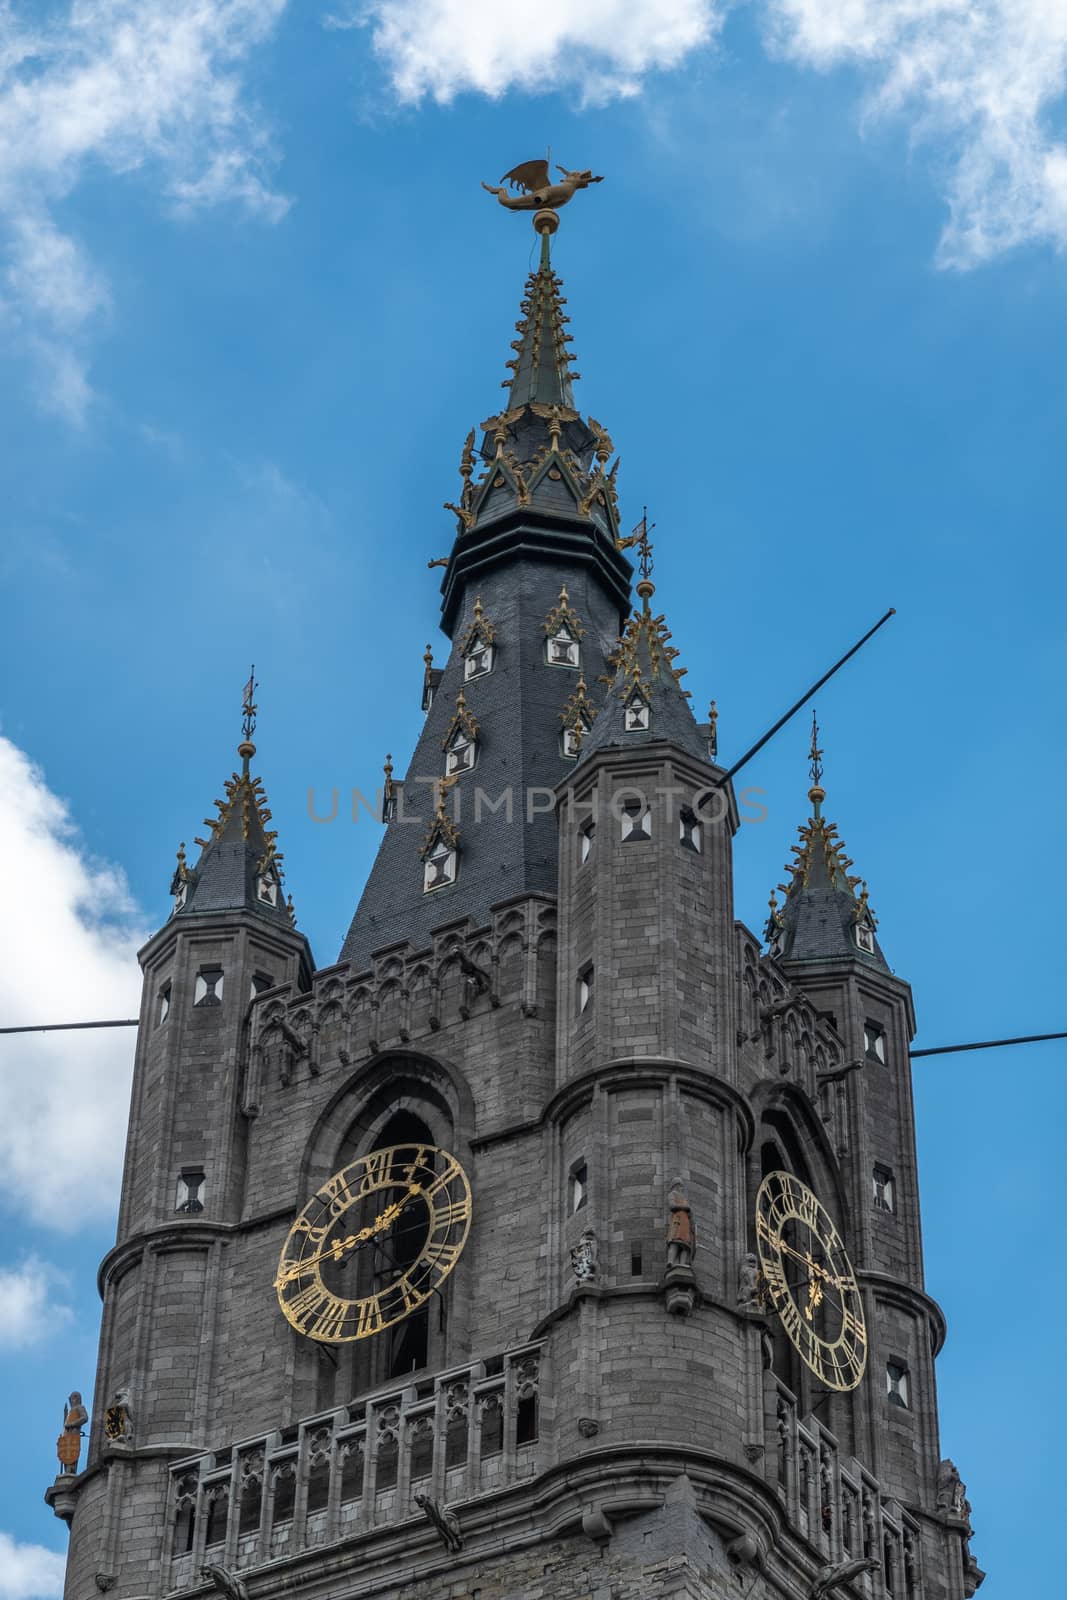 Gent, Flanders, Belgium -  June 21, 2019: Closeup of top of dark stone Belfry clock tower against blue sky with white patches. Gulden Draak, dragon on pinacle.